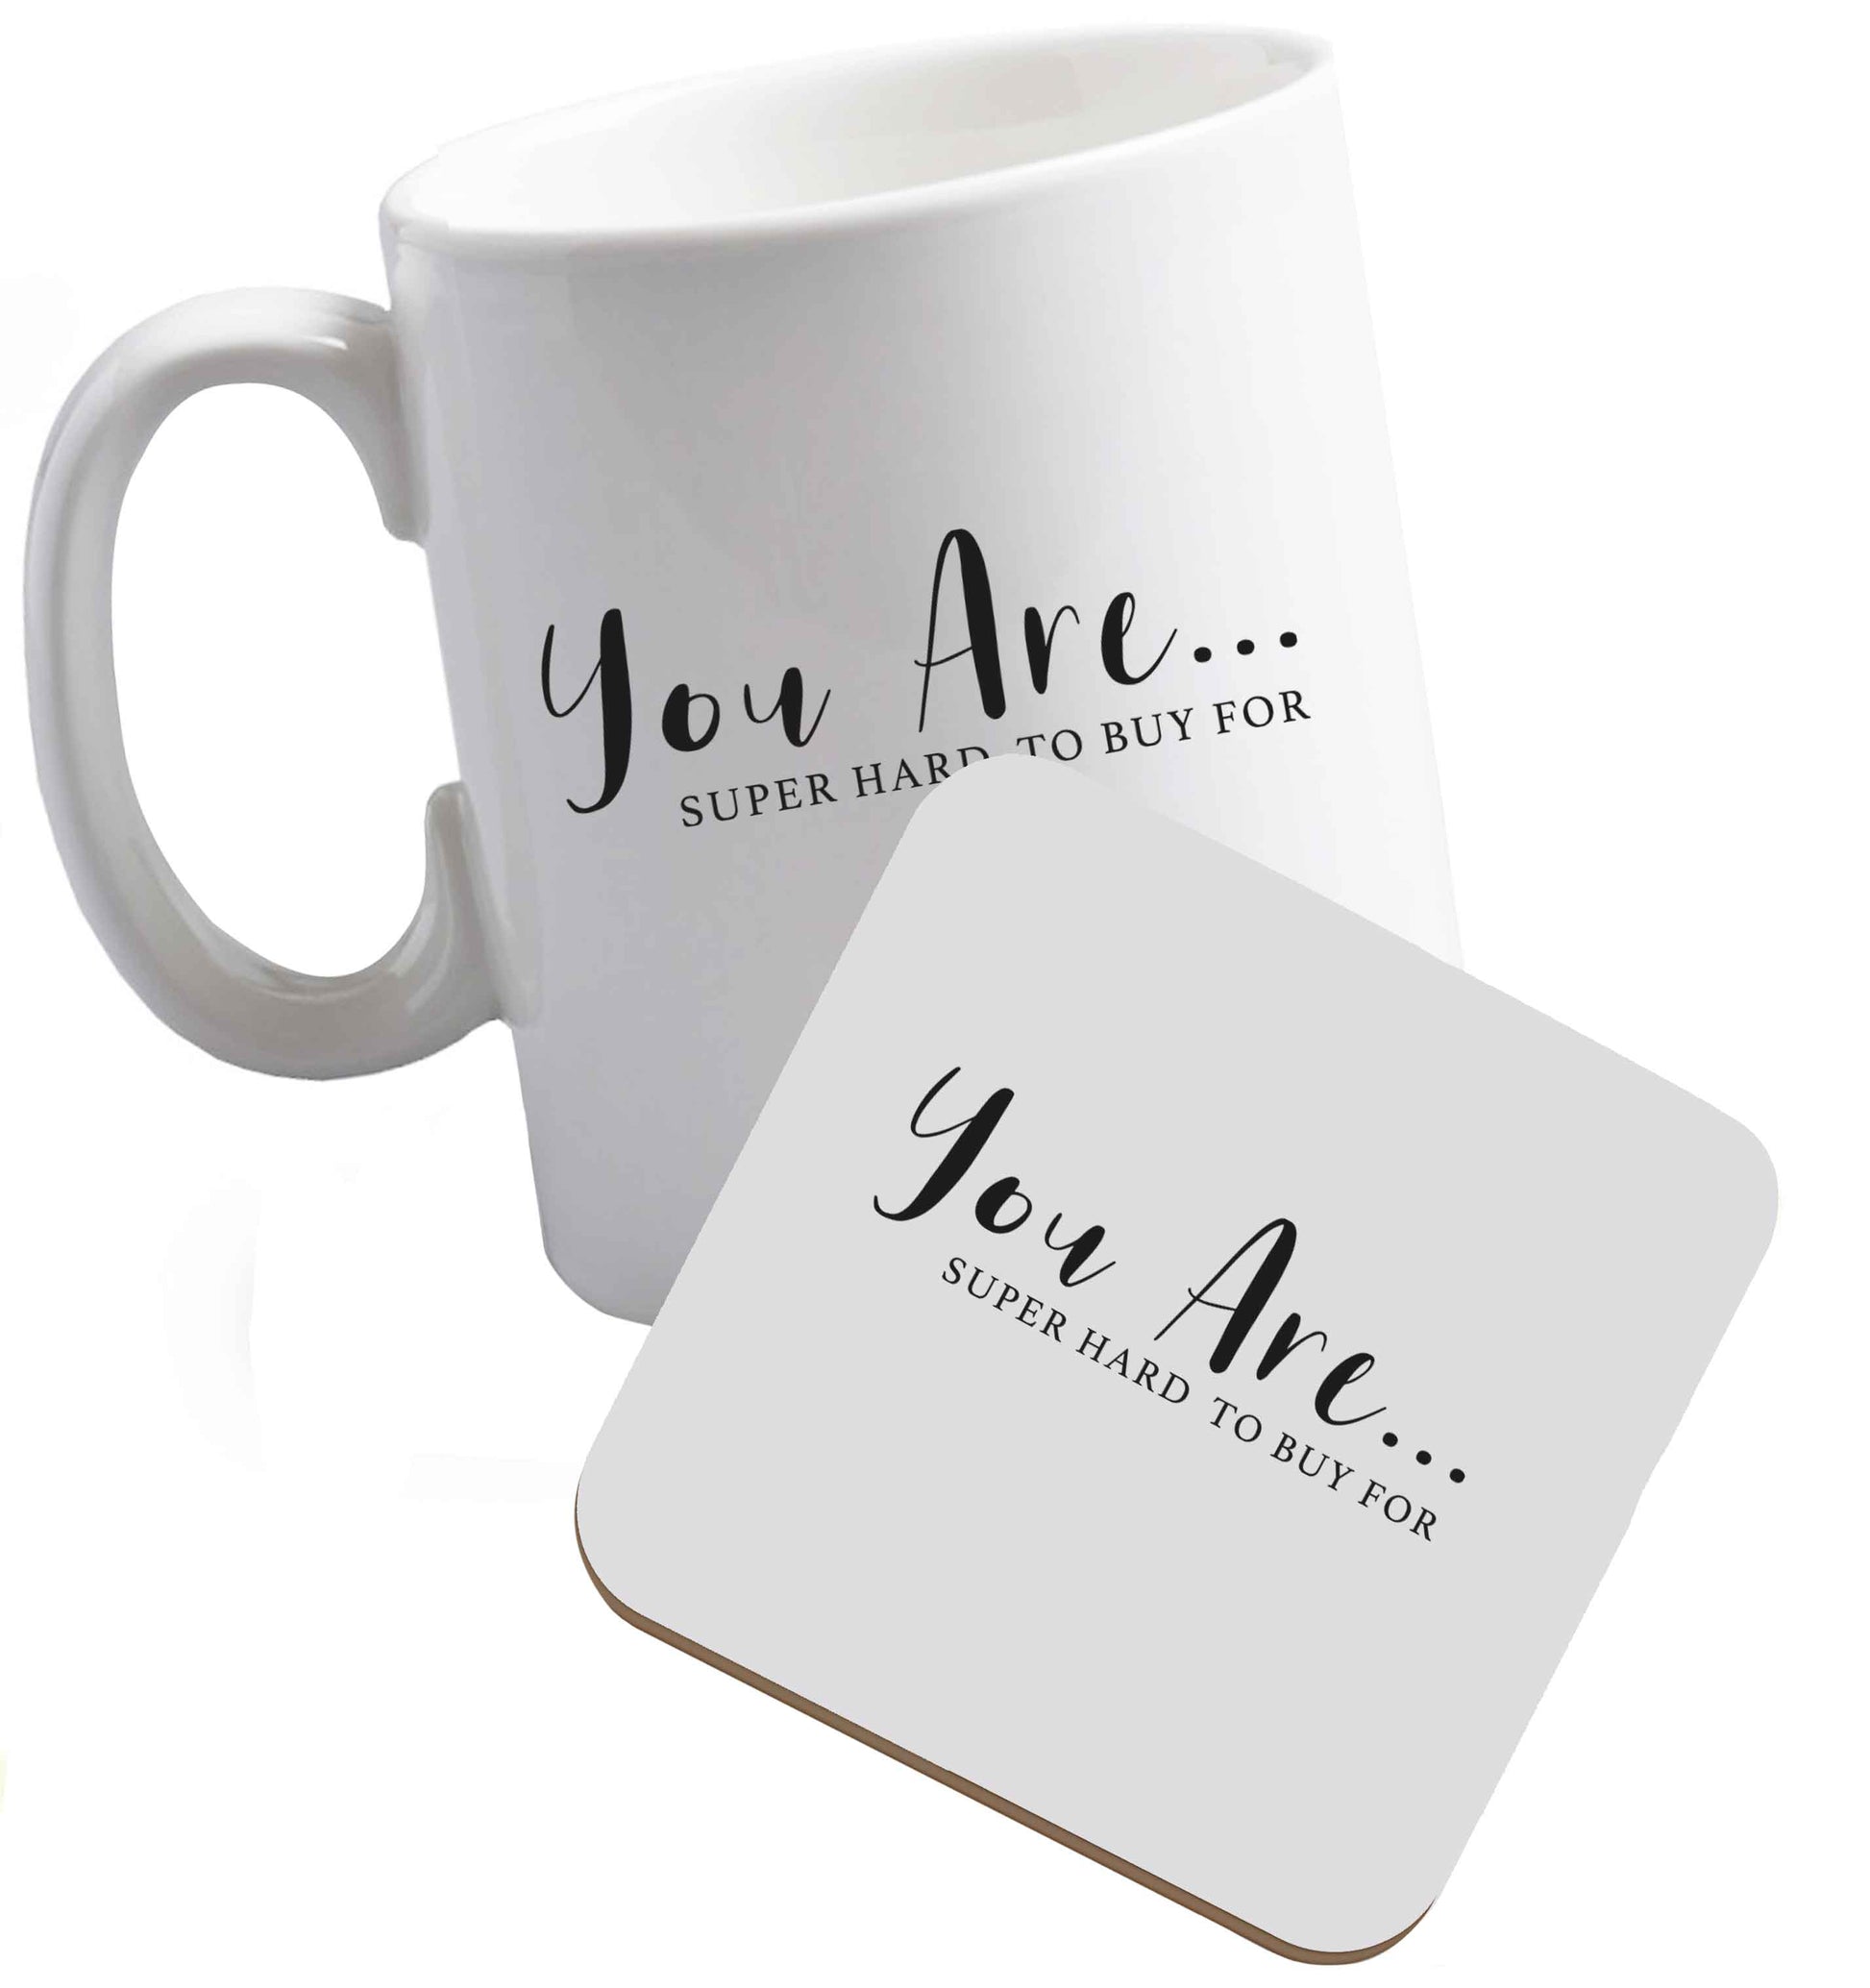 10 ozHave You Seen my Sanity ceramic mug and coaster set right handed